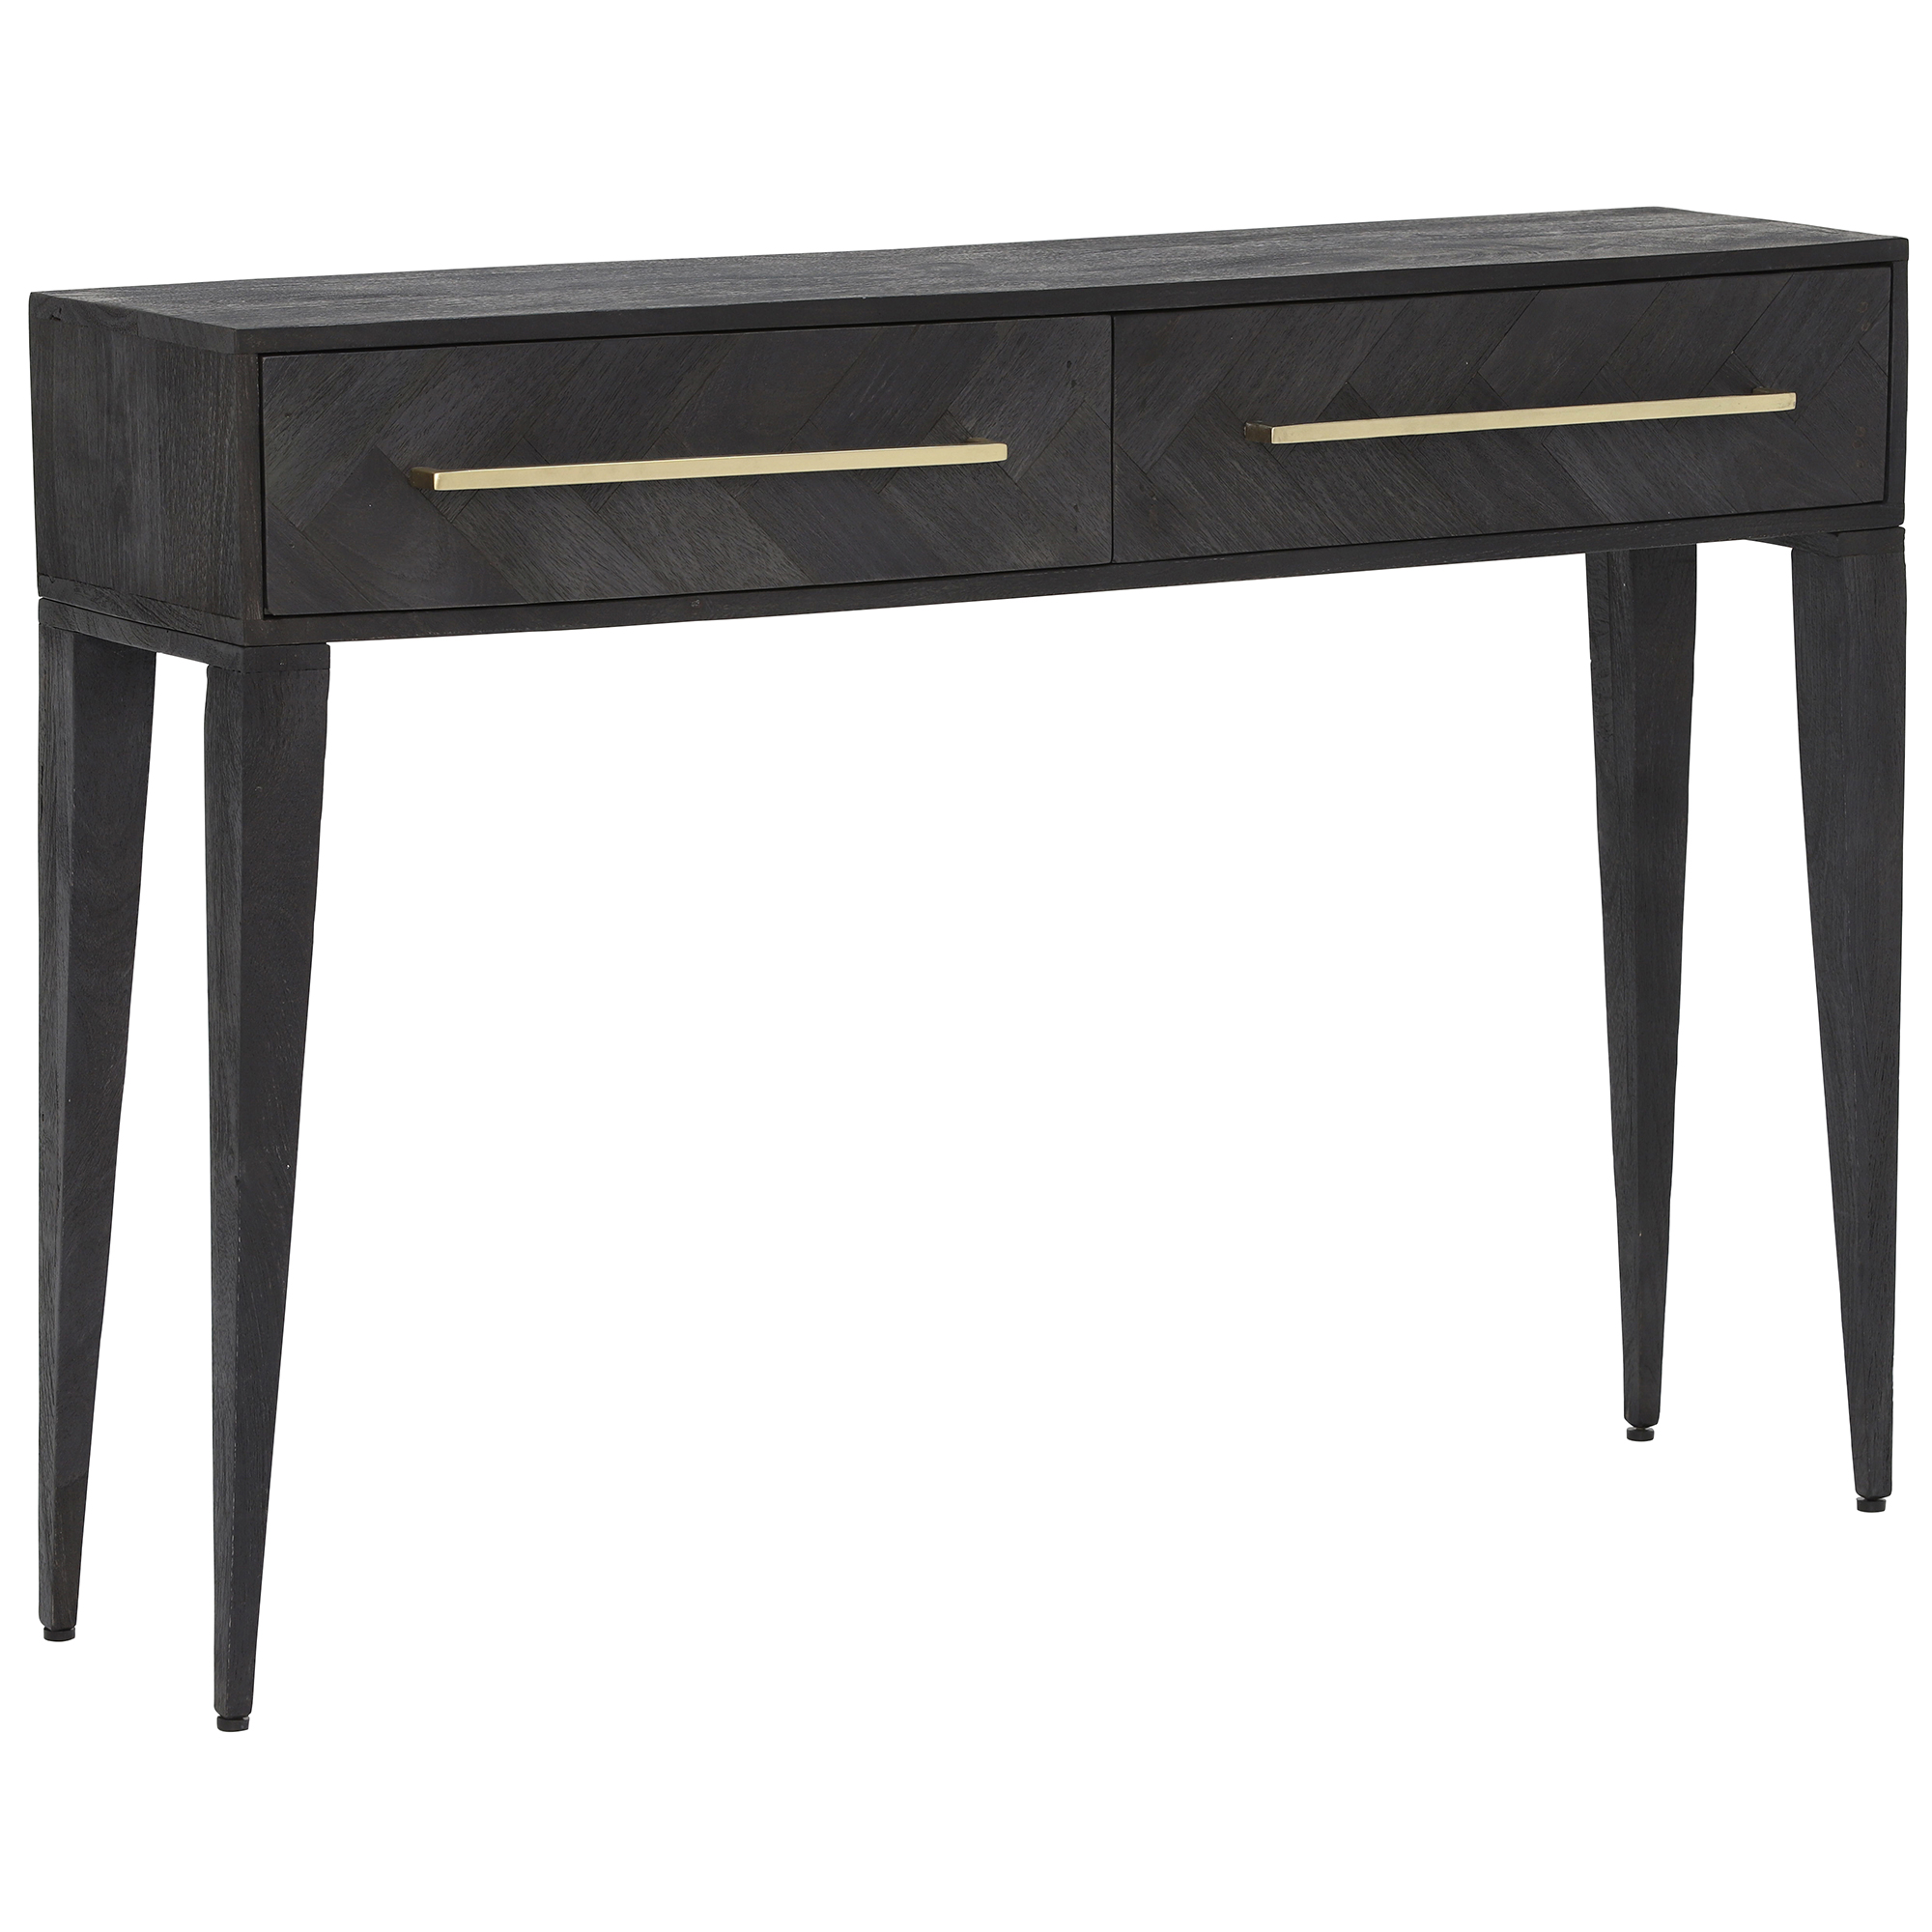 Onyx Console Table, Black Wood | Barker & Stonehouse